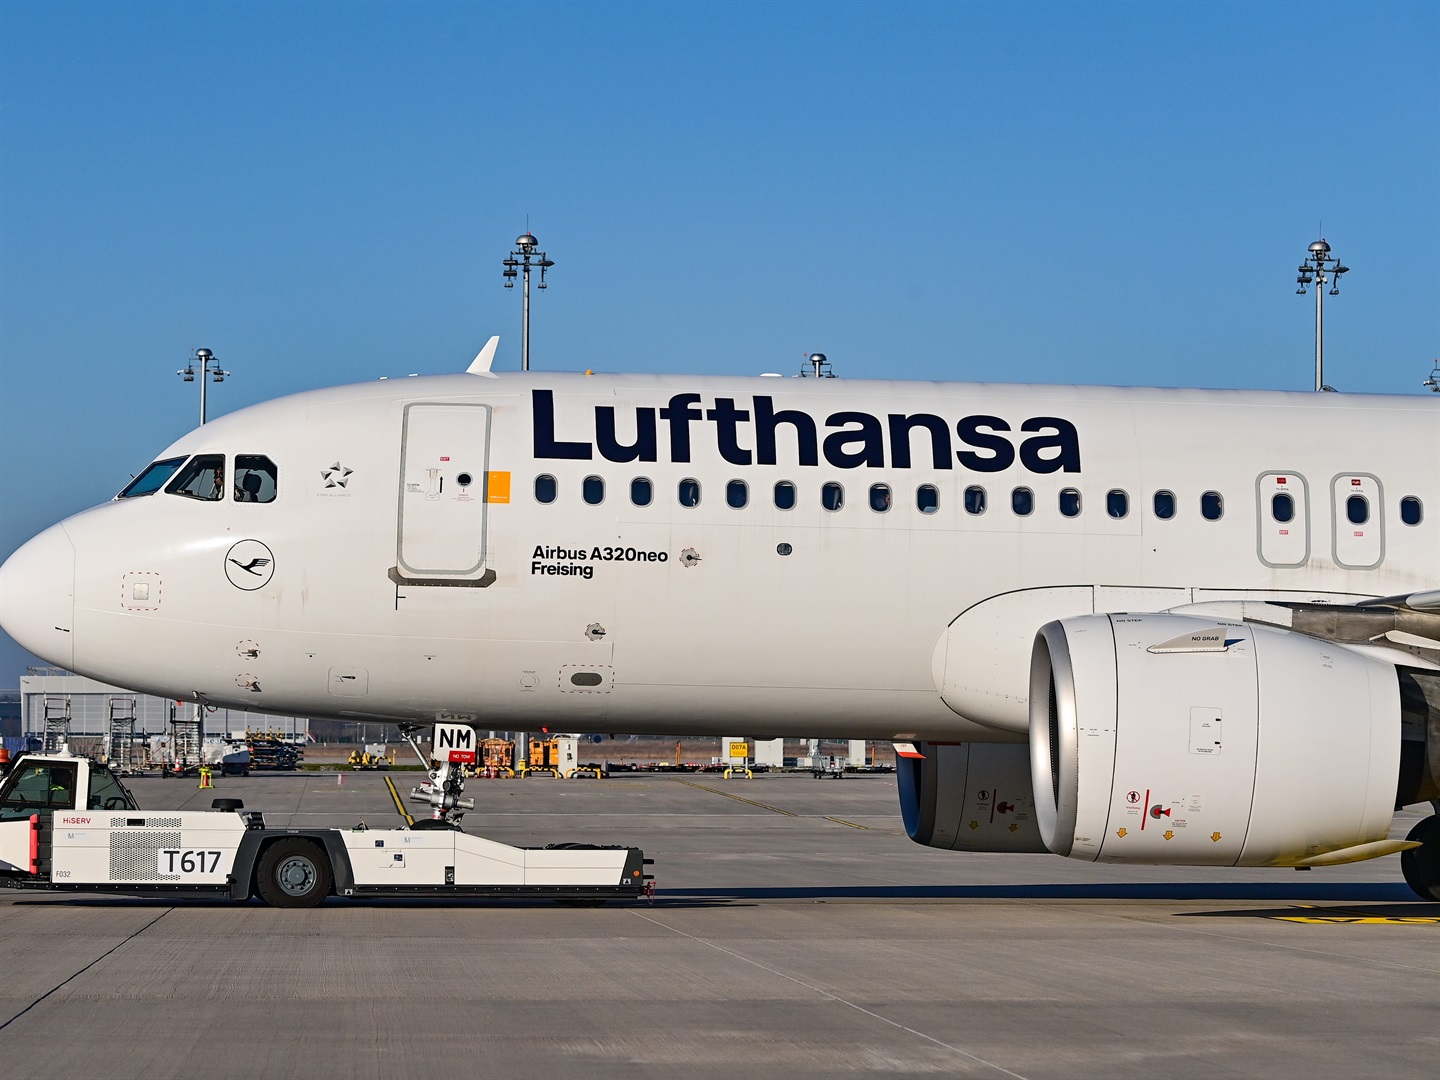 Lufthansa says Ukraine war is contributing to flight delays because it’s restricting European airspace